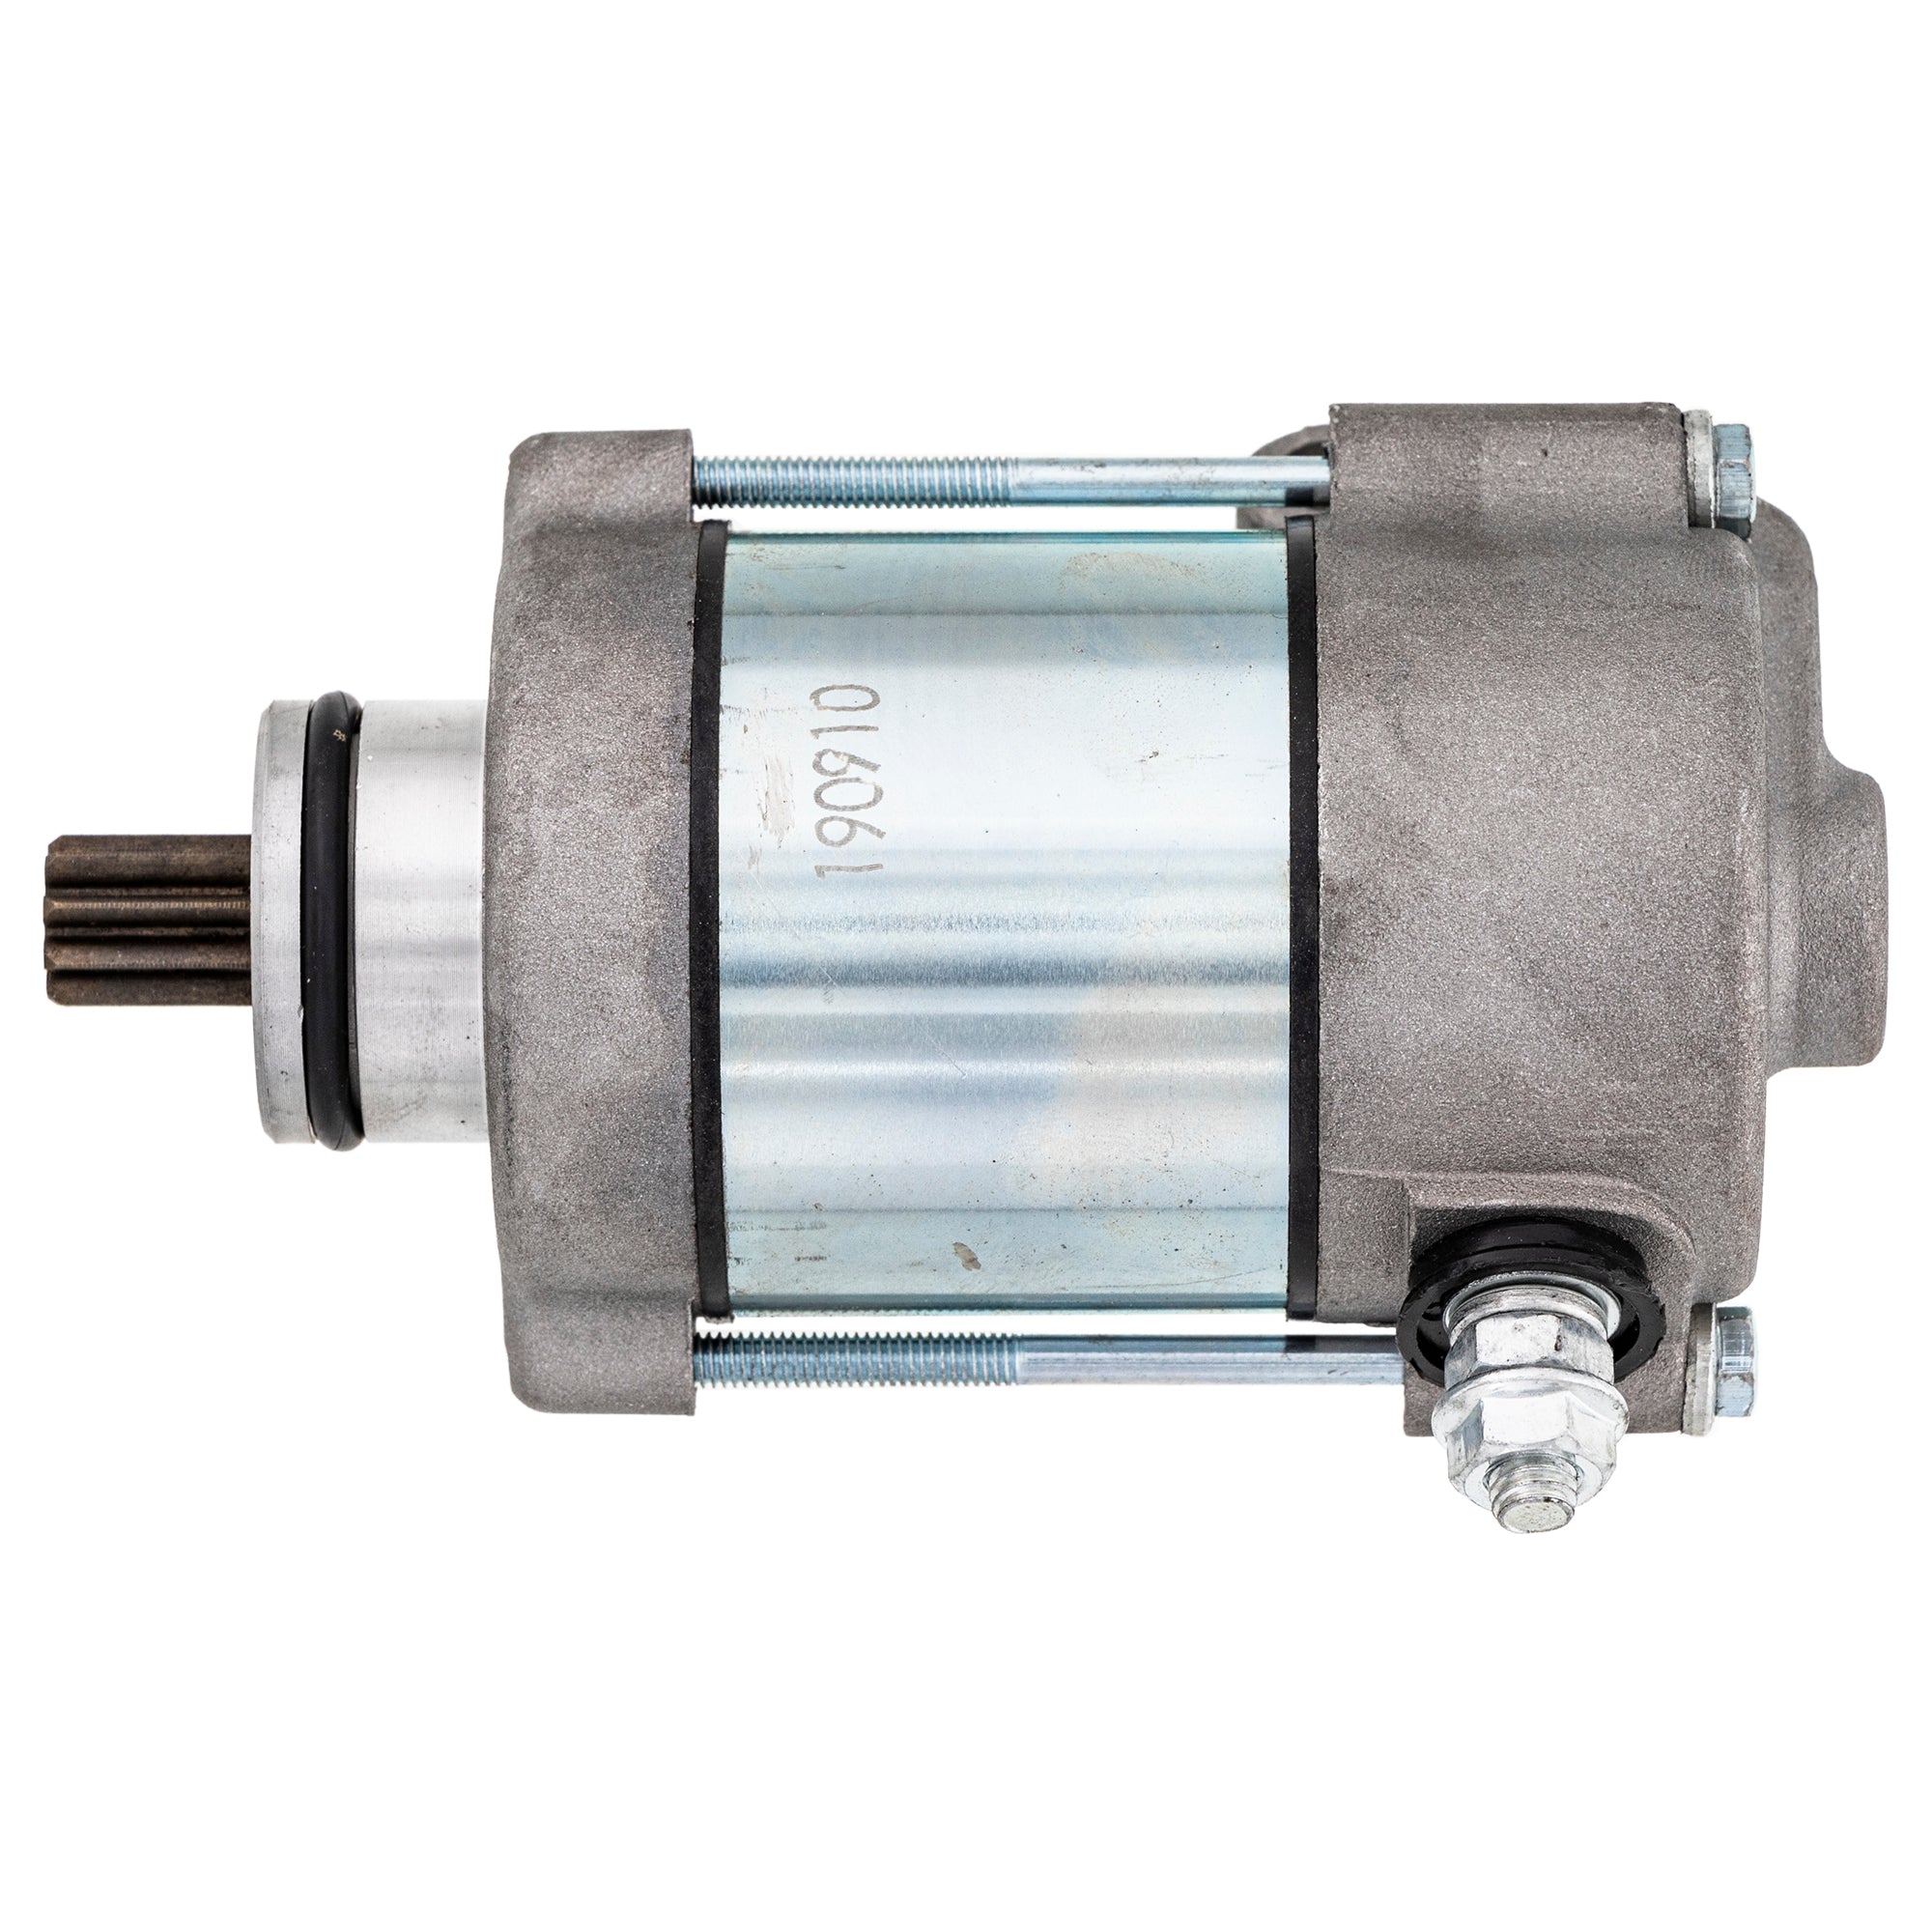 NICHE 519-CSM2207O Starter Motor Assembly for zOTHER KTM Arrowhead